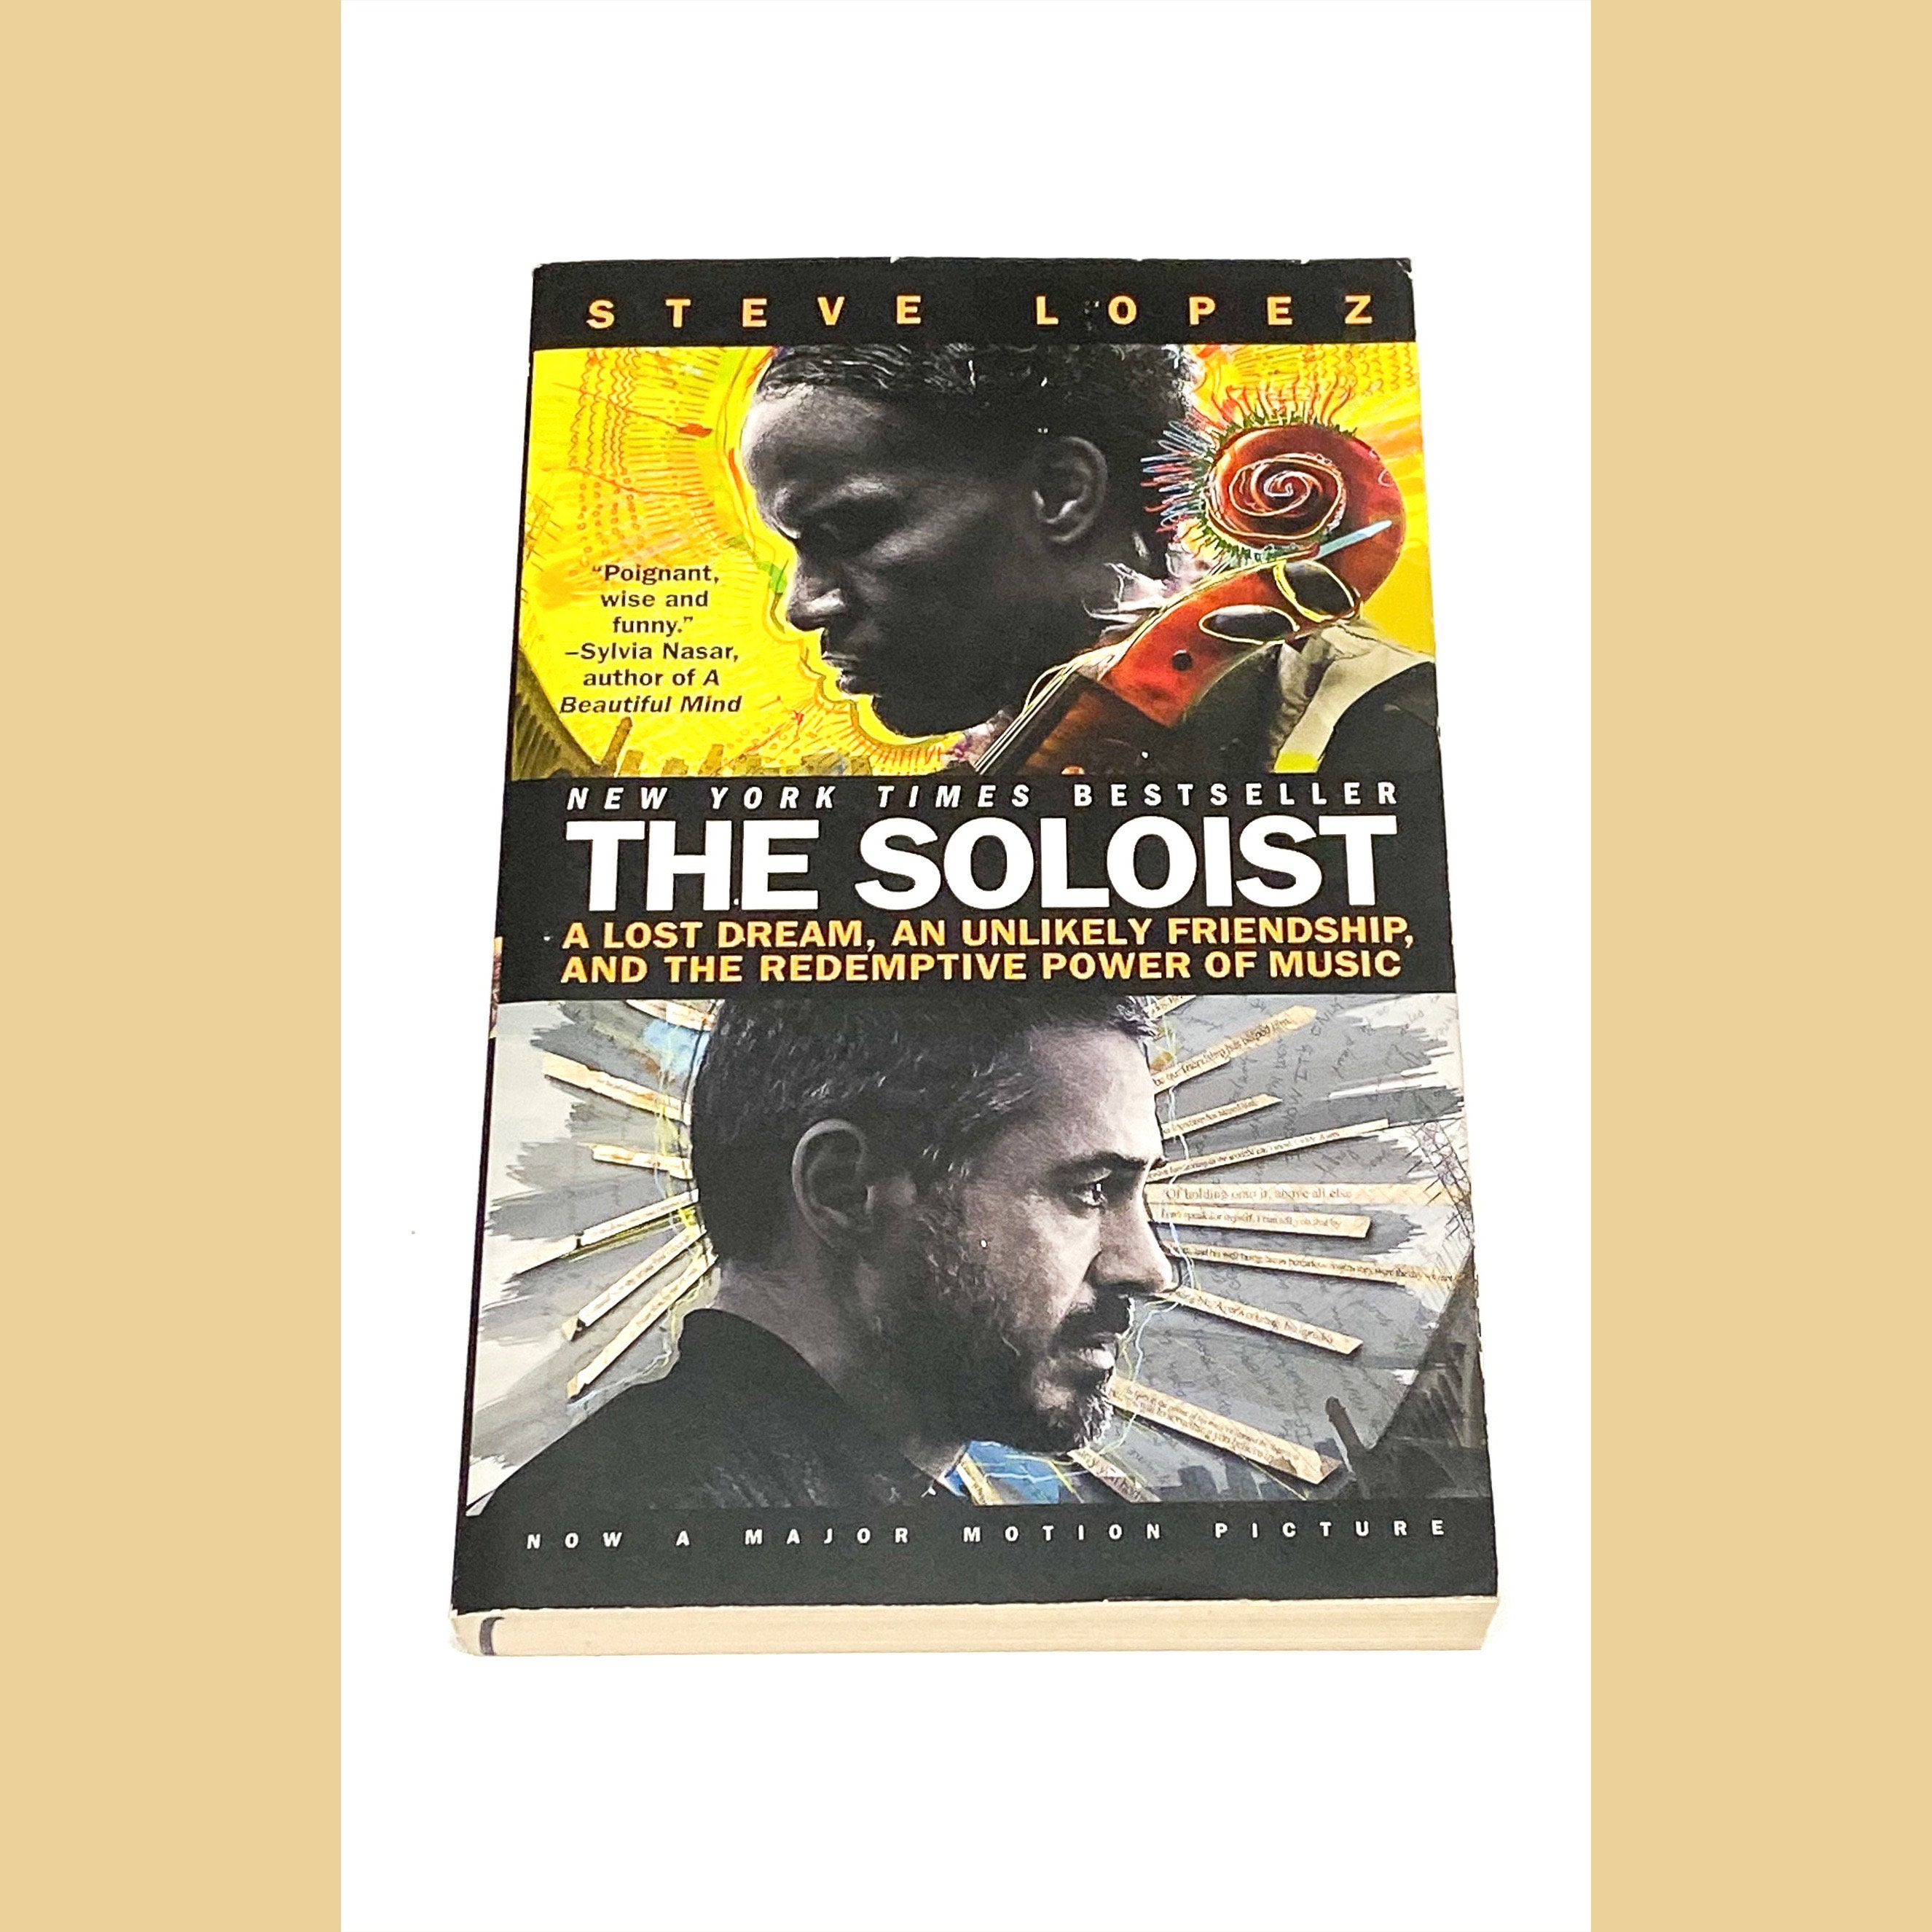 The Soloist: A Lost Dream, an Unlikely Friendship, and the Redemptive Power  of Music a book by Steve Lopez